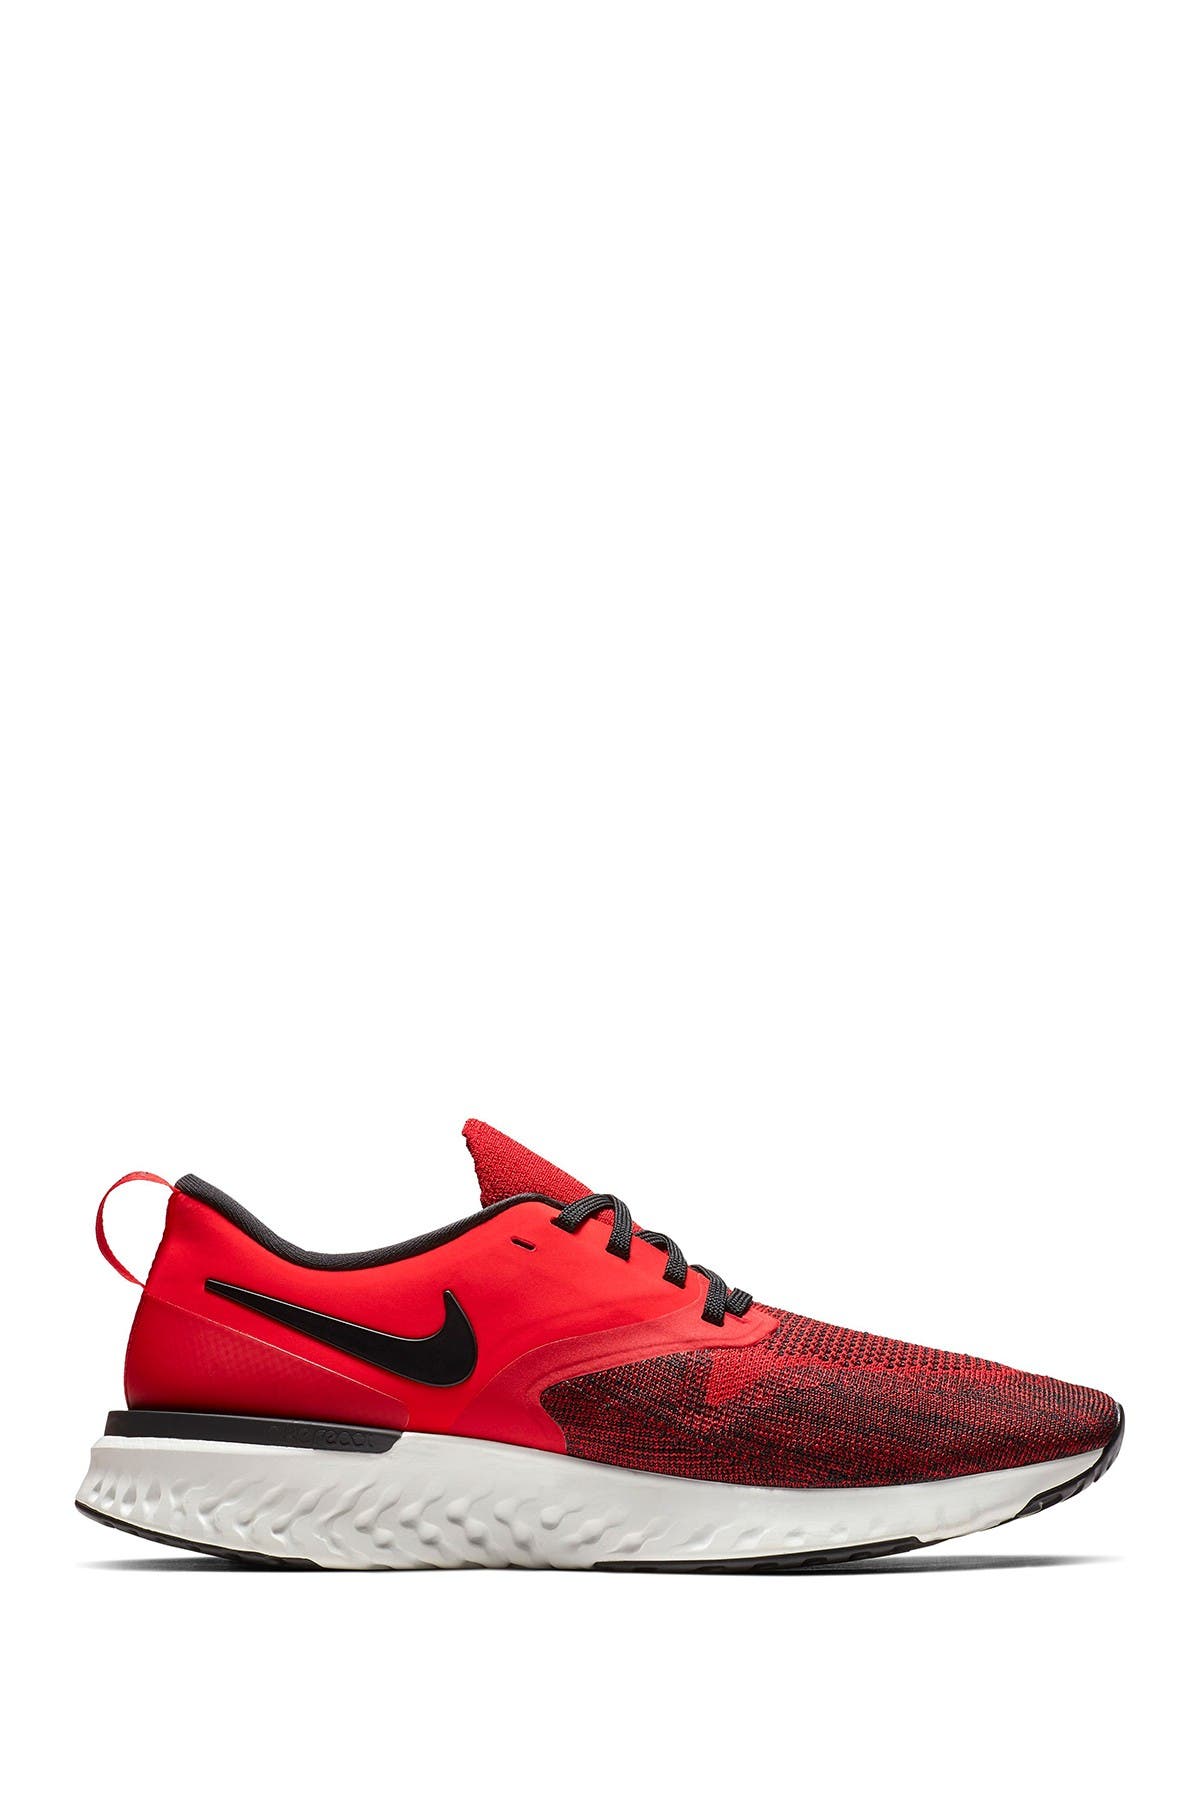 men's nike odyssey react flyknit 2 graphic running shoes